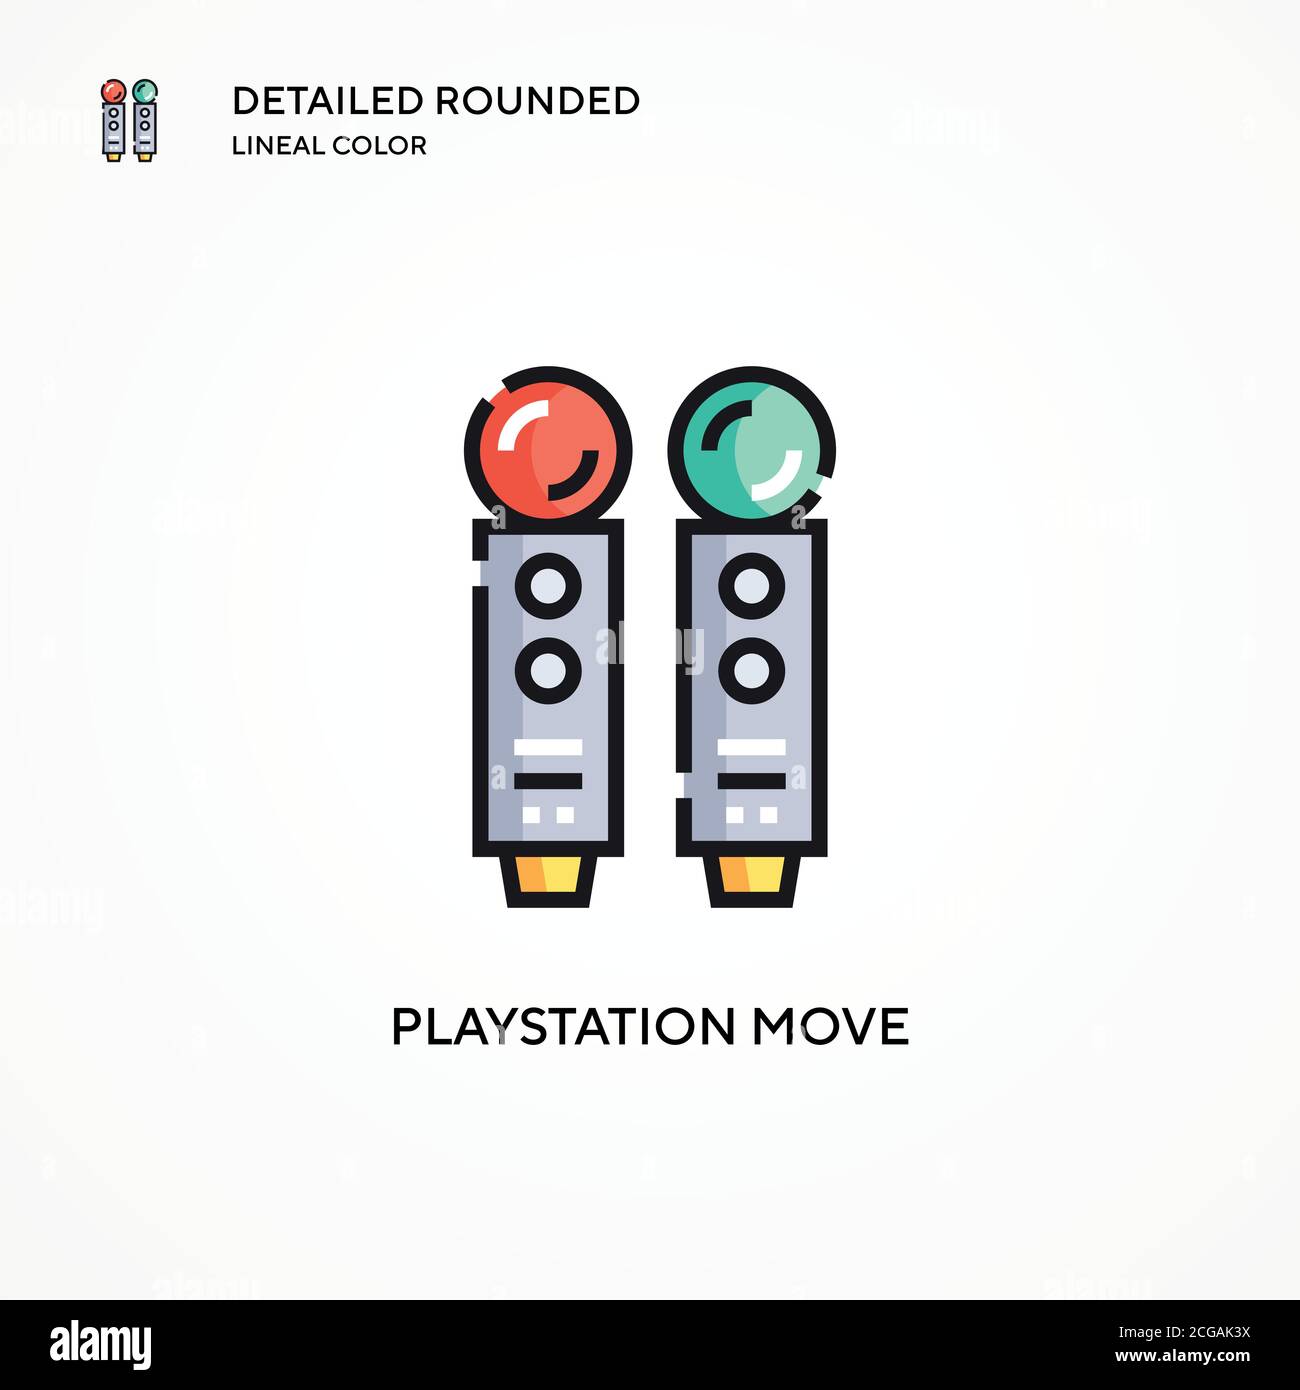 Playstation move vector icon. Modern vector illustration concepts. Easy to edit and customize. Stock Vector